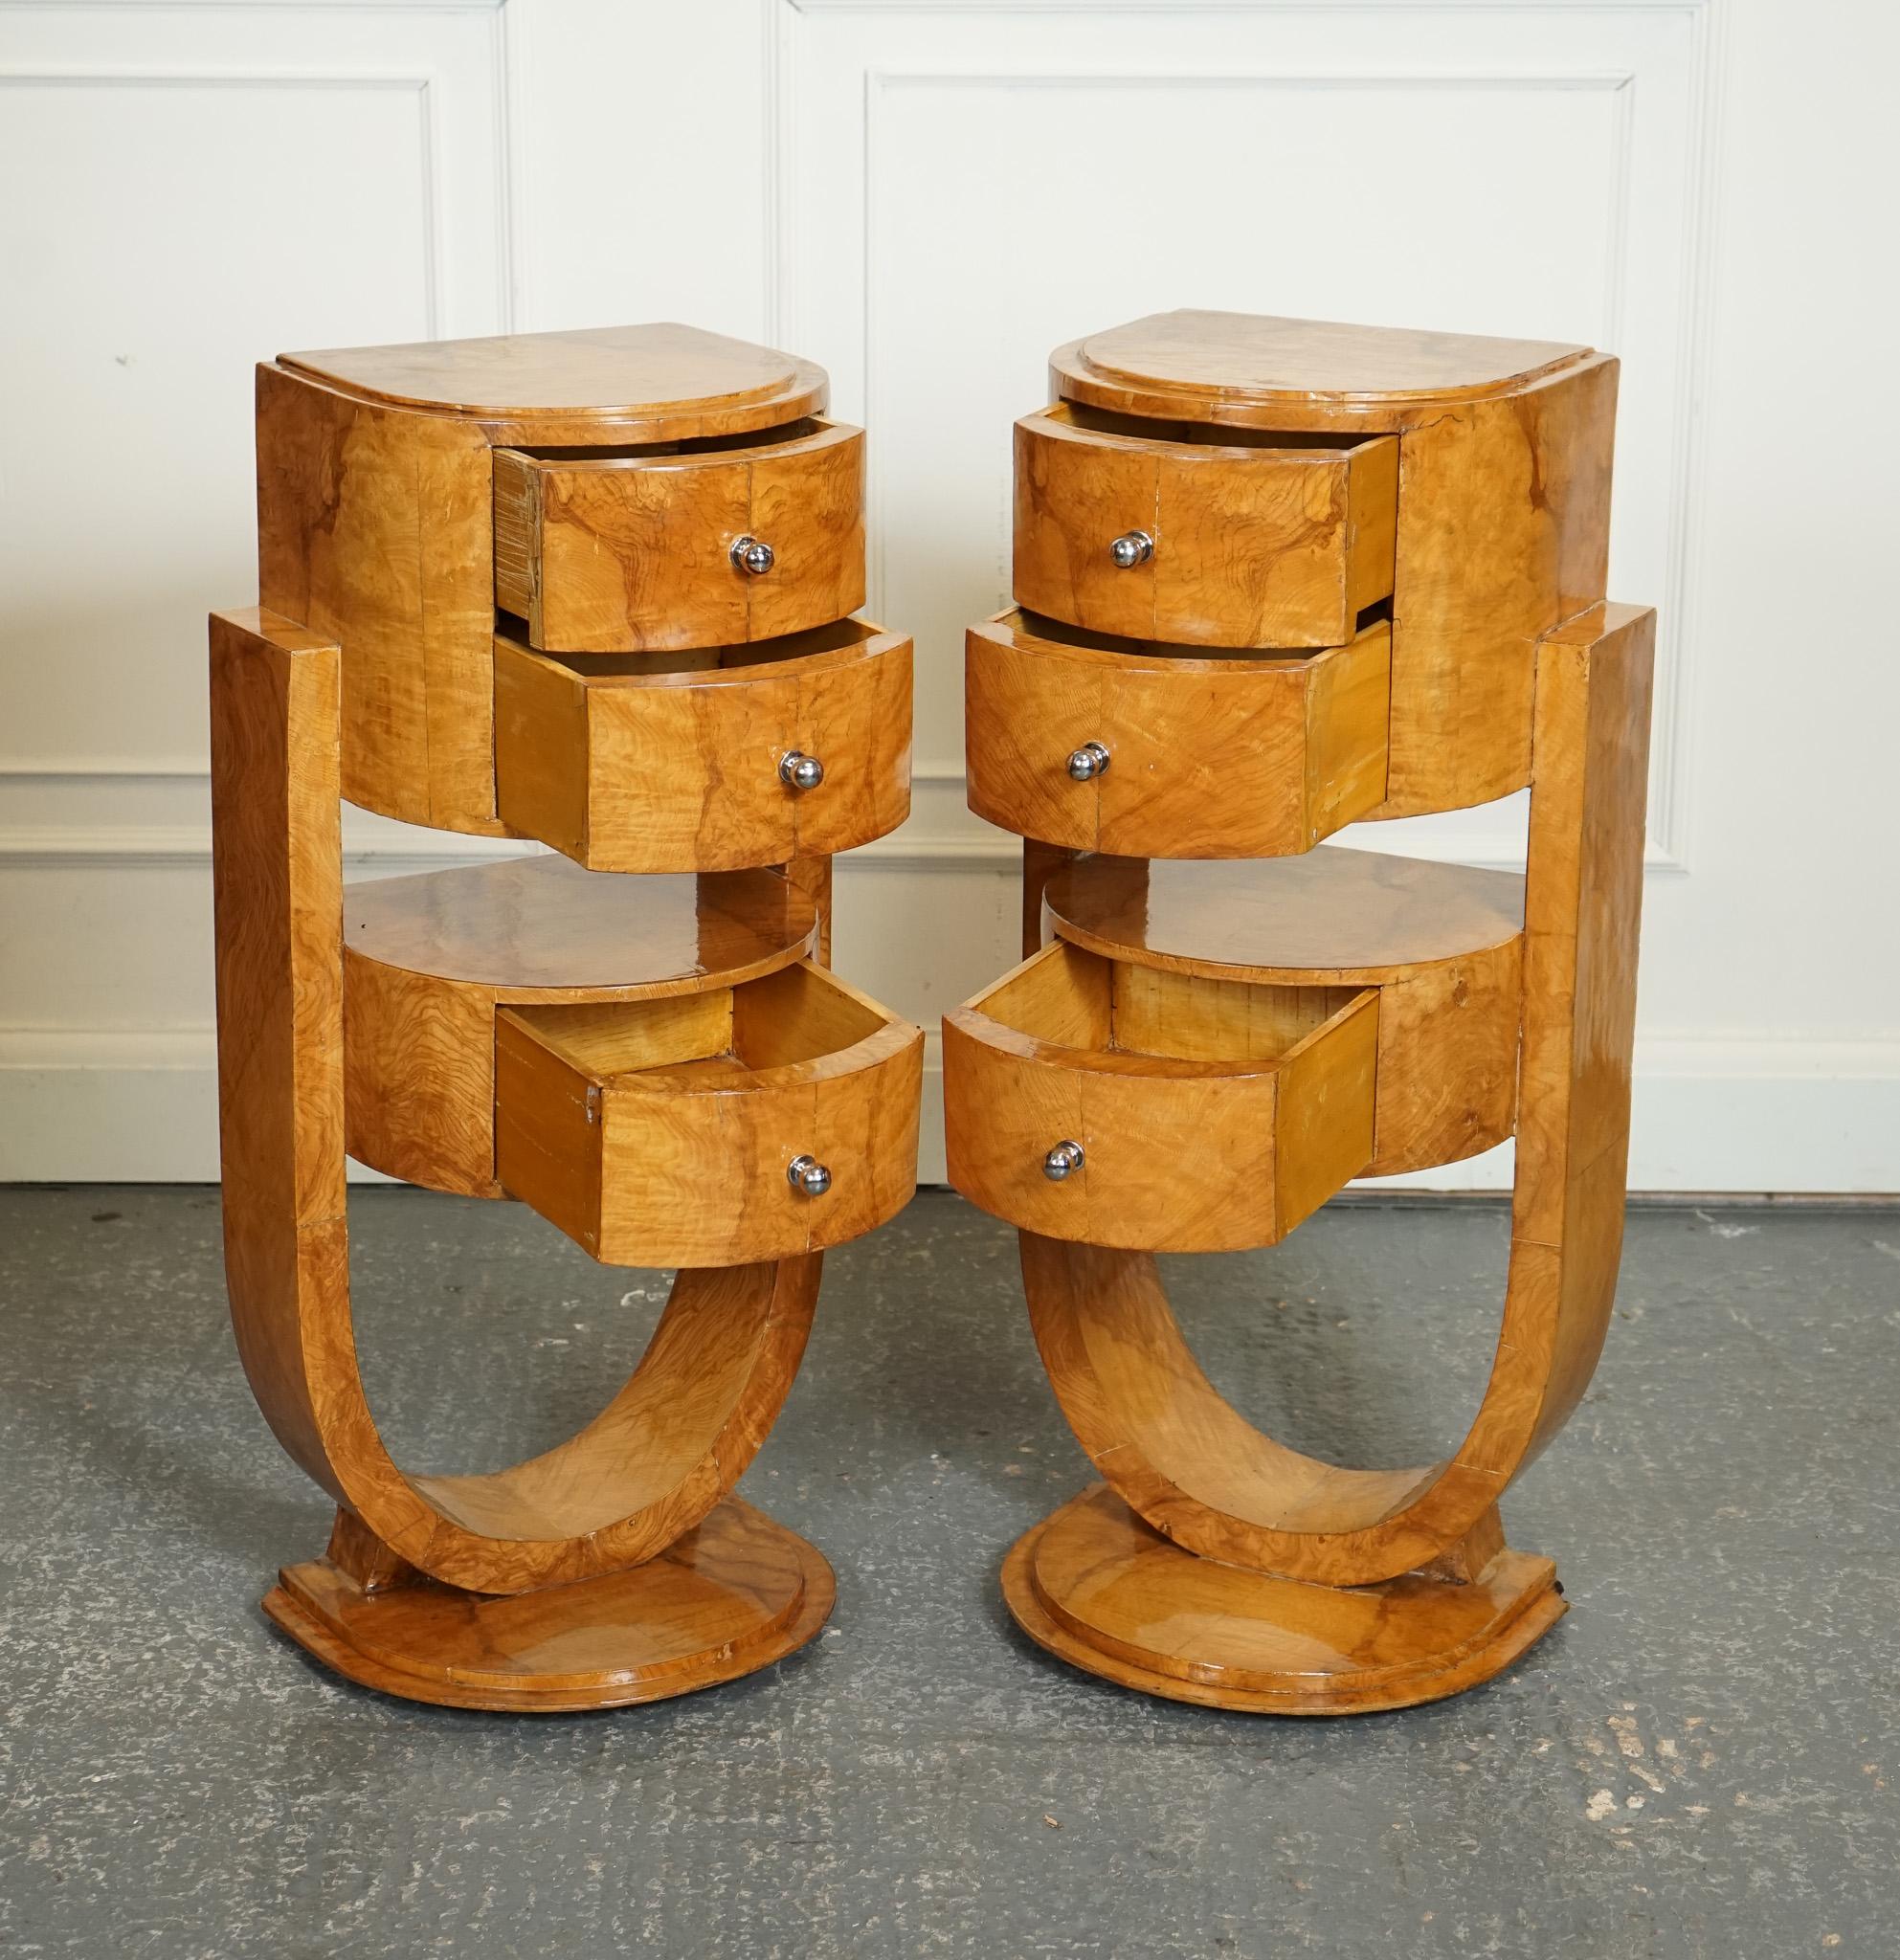 
We are delighted to offer for sale this Pair of Art Deco Style Burr Walnut Bedside Tables.

These pair of Art Deco Style burr walnut veneered on hardwood bedside cabinets nightstands lamp end tables are truly stunning pieces that embody the style